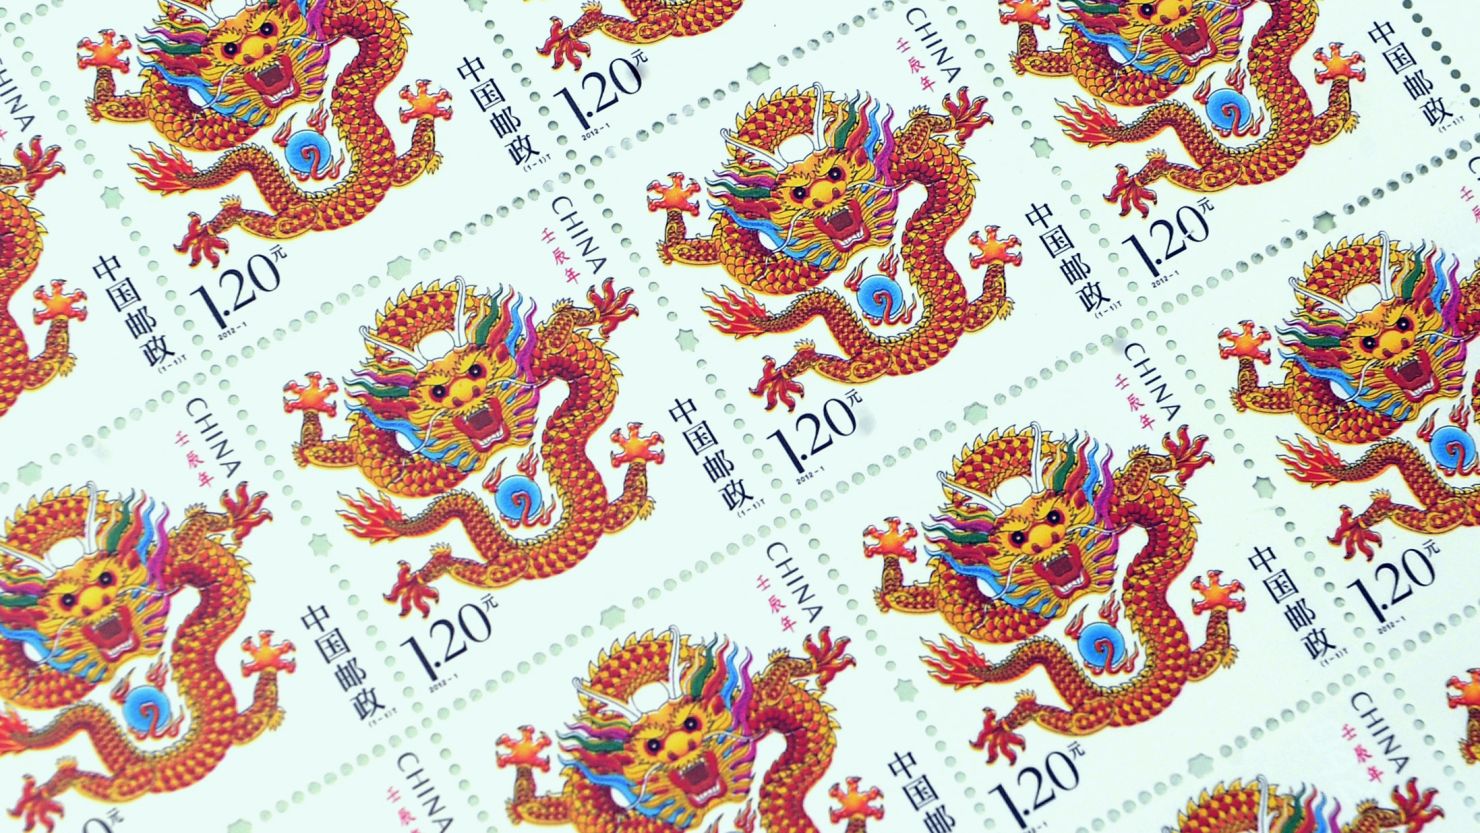 China's new stamp of a "ferocious" dragon has raised concerns that the post office has put too hard of an image on China.